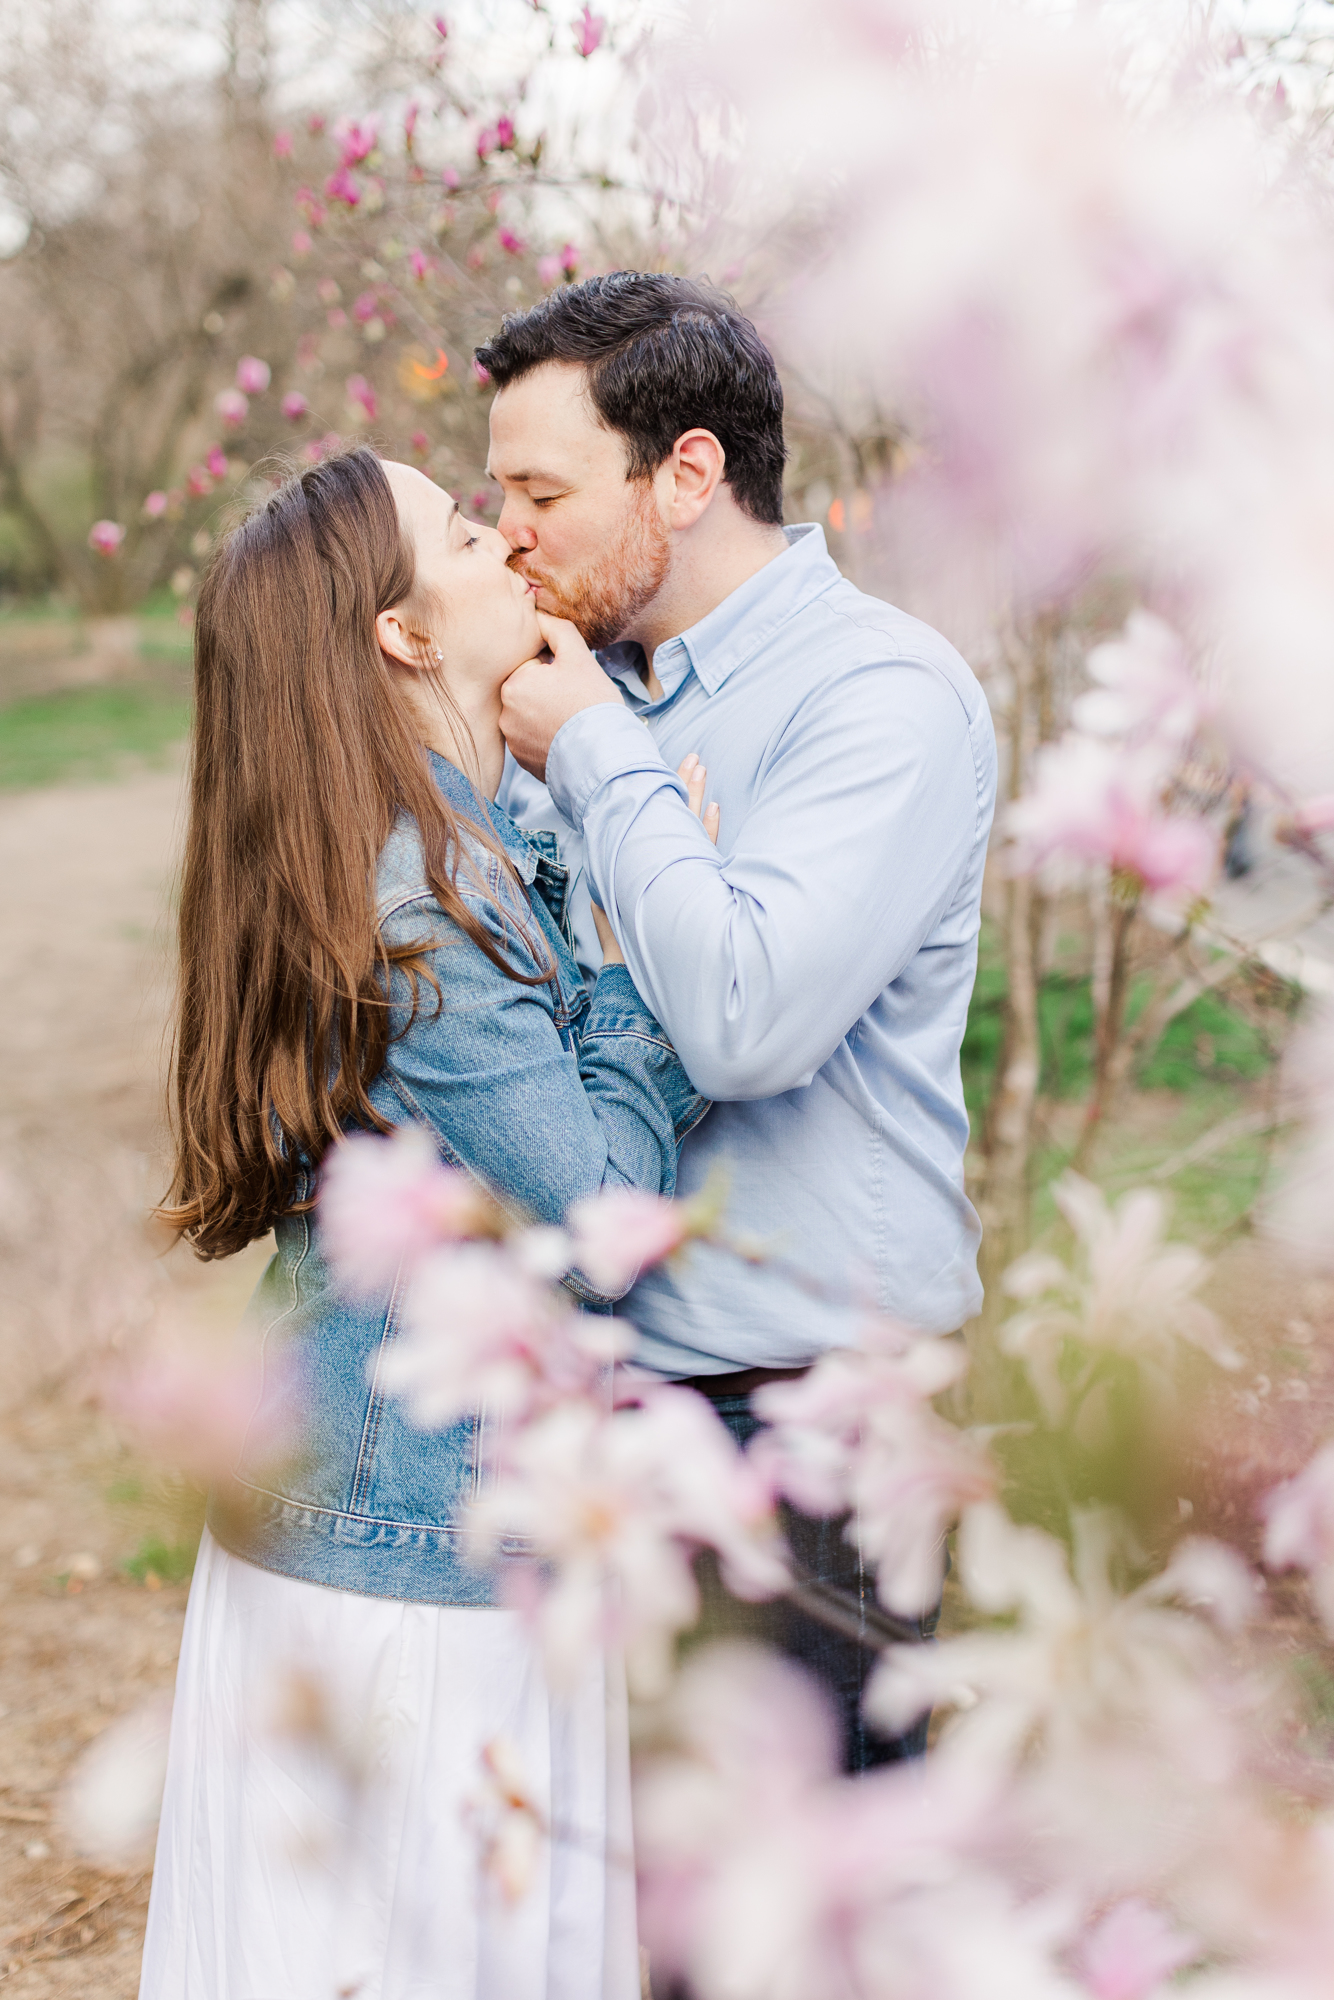 Candid Engagement Photos with a Professional Engagement Photographer